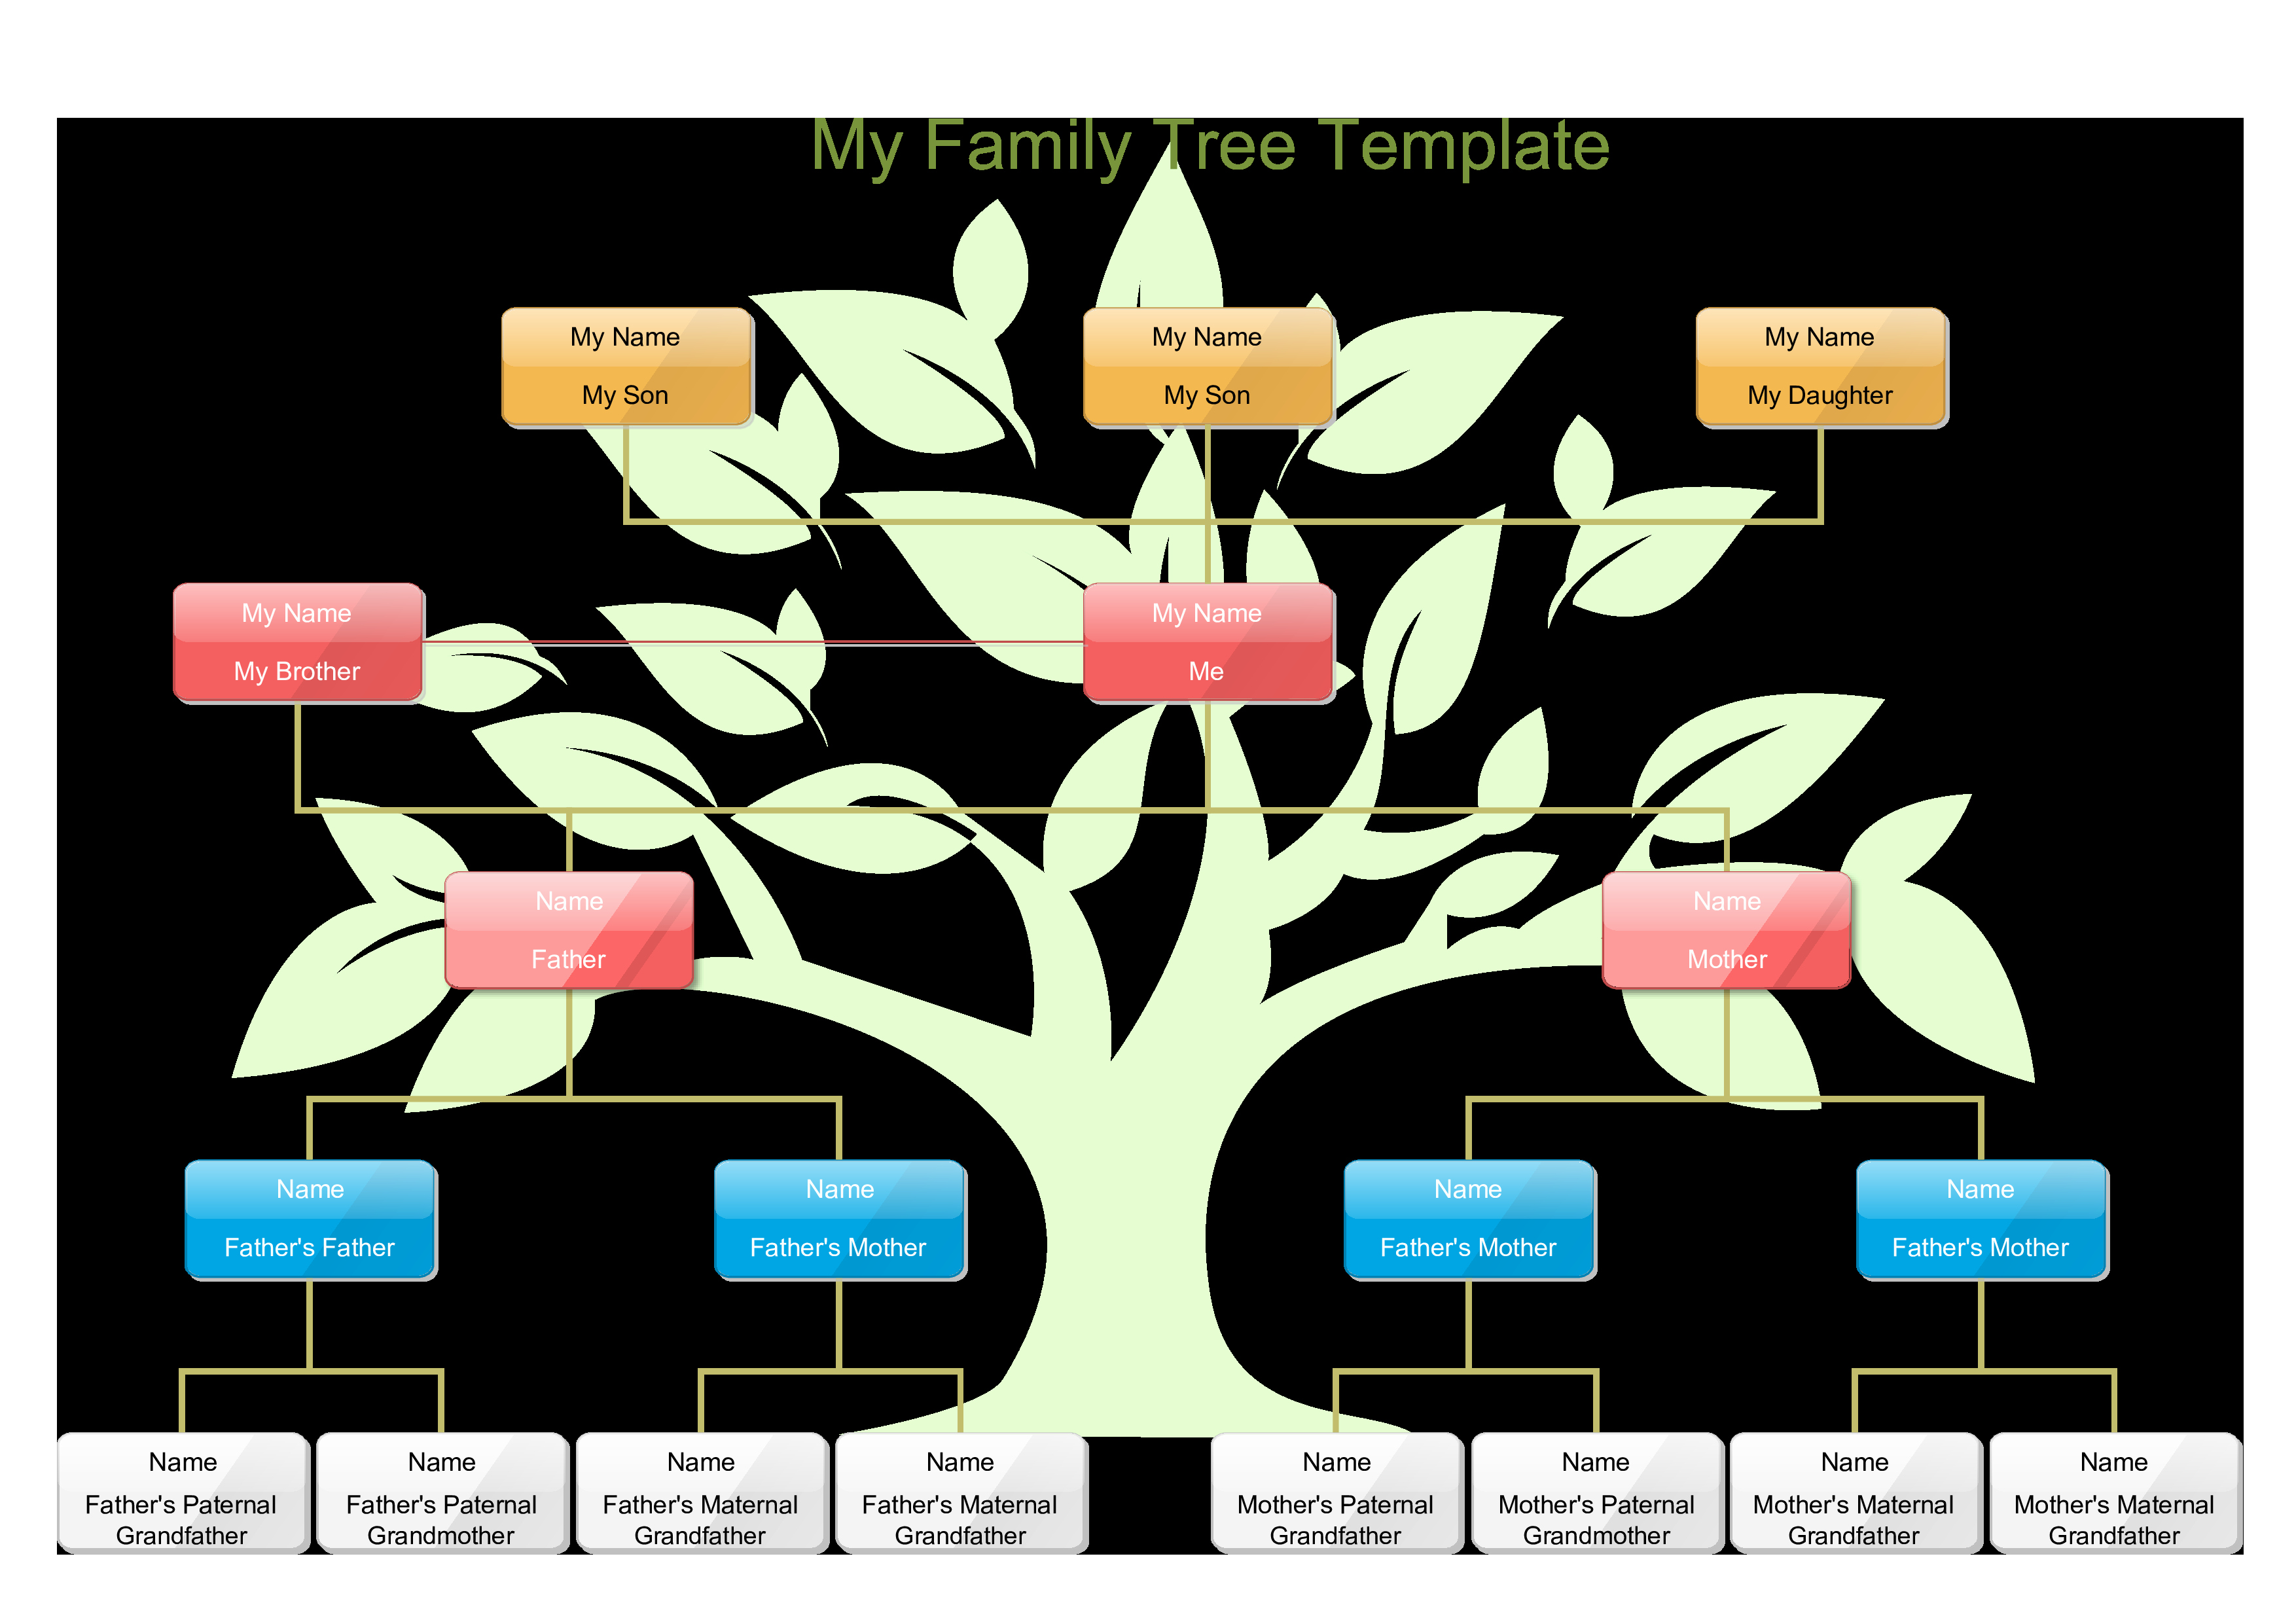 Free My Family Tree Template for Kids